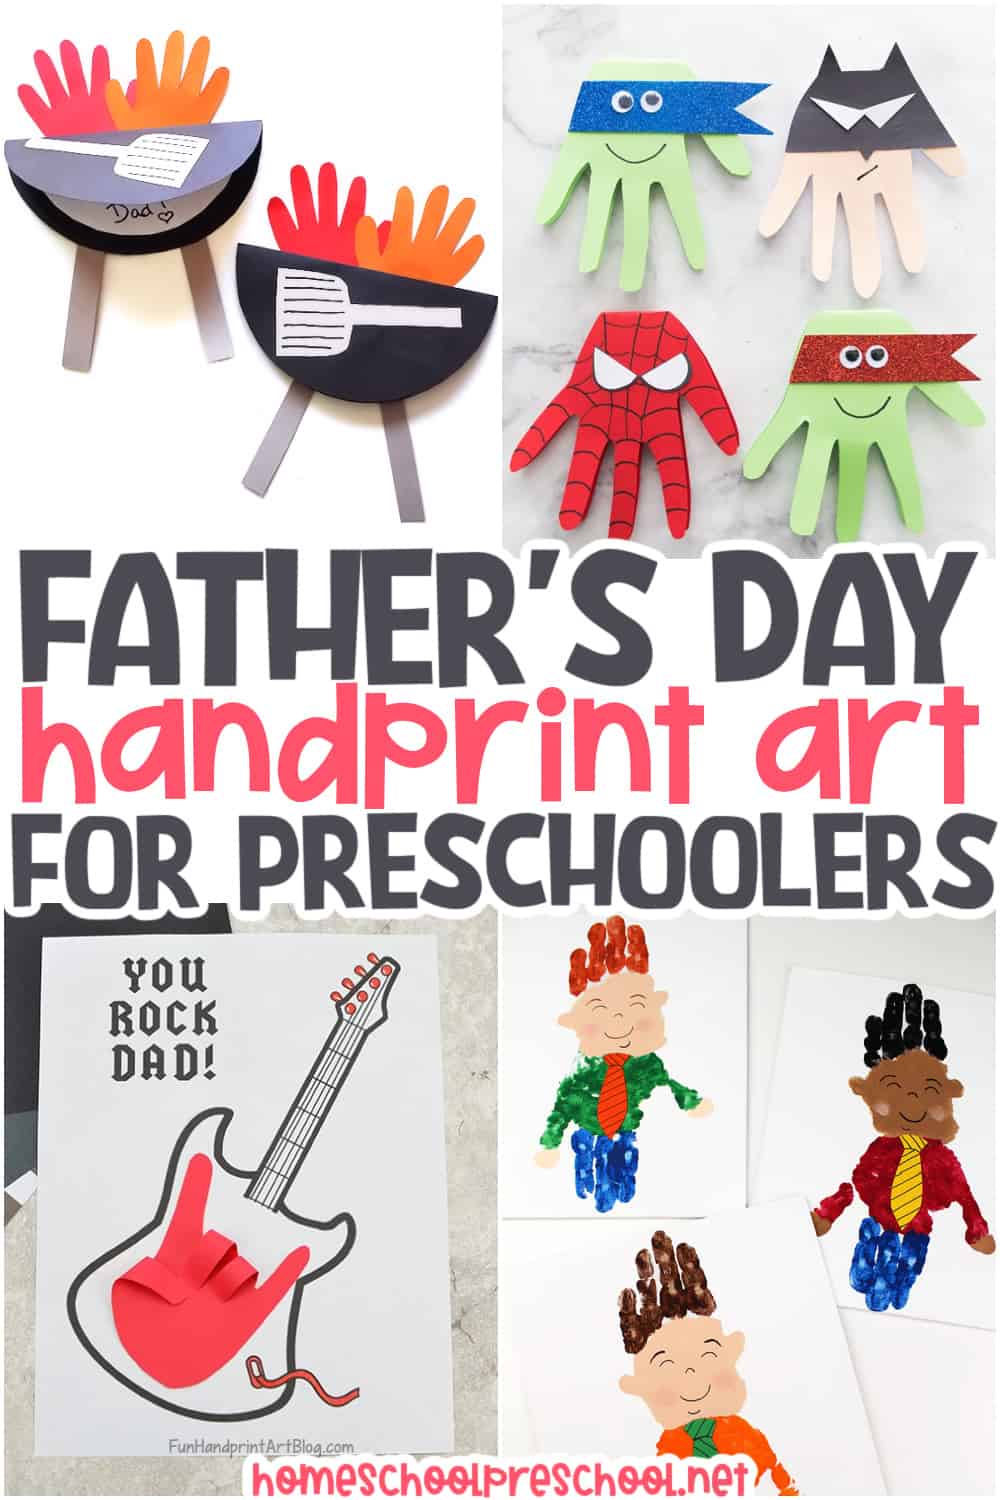 pinterest collage of father's day handprint art ideas for preschoolers